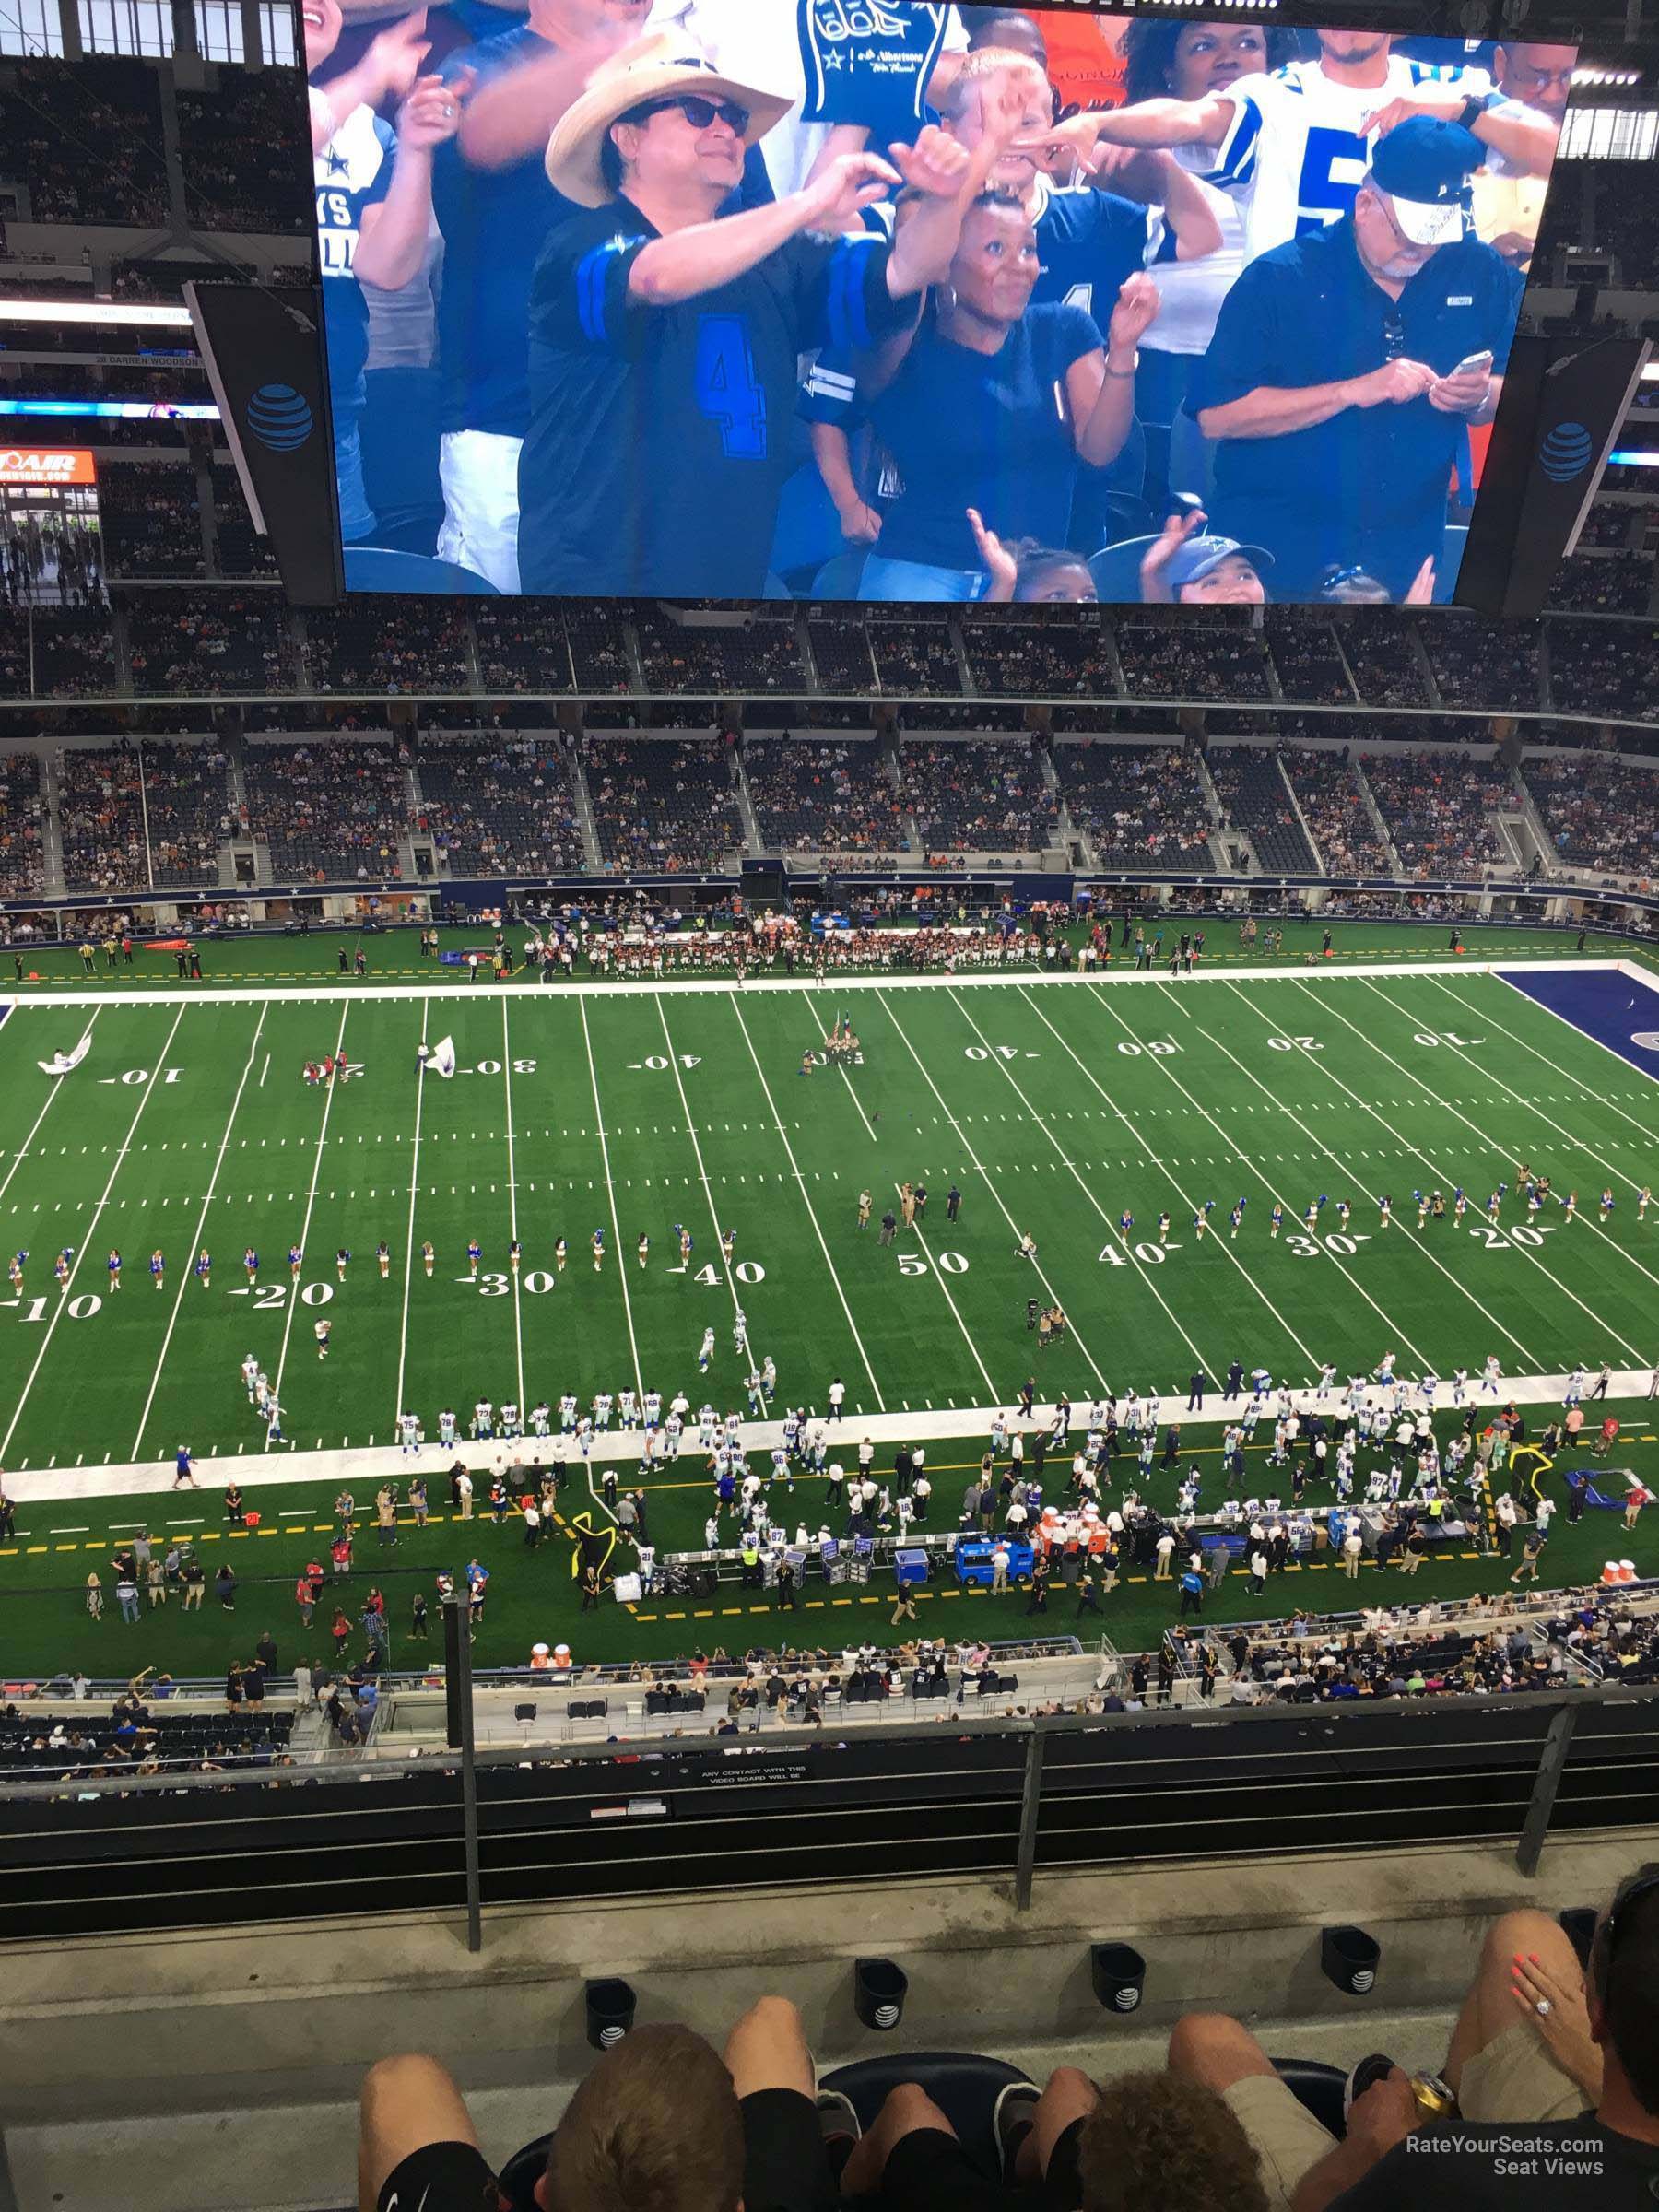 section 414, row 4 seat view  for football - at&t stadium (cowboys stadium)